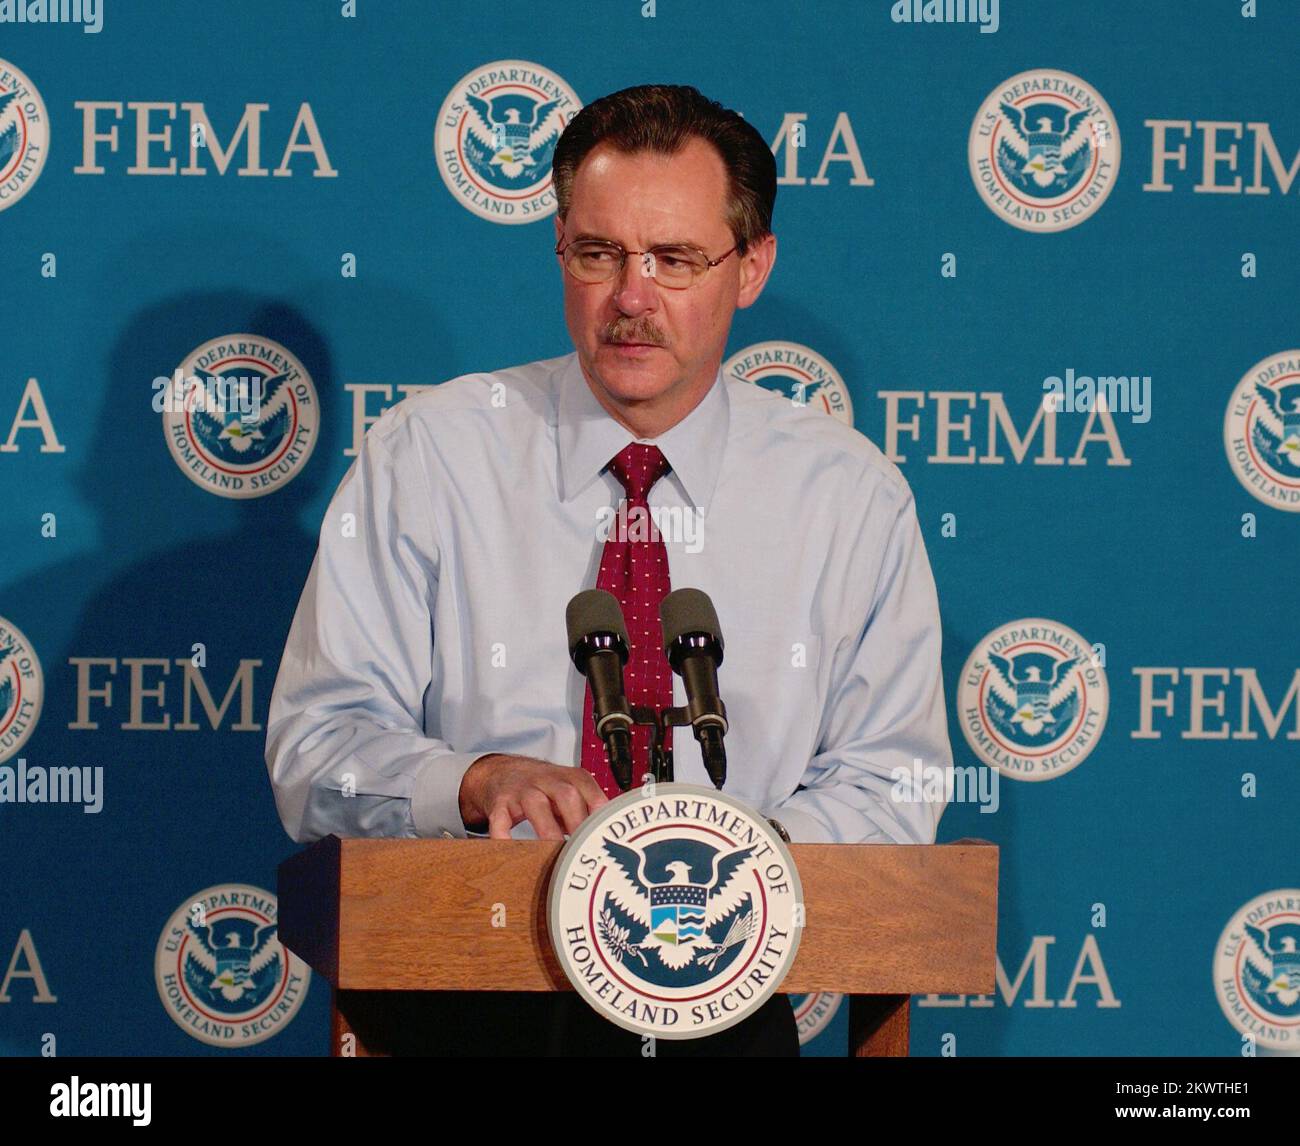 Washington, DC, October 20, 2005   R. David Paulison, the Acting FEMA Director reports on the activity of hurricane Wilma and ongoing preparations in Florida. Bill Koplitz/FEMA.. Photographs Relating to Disasters and Emergency Management Programs, Activities, and Officials Stock Photo